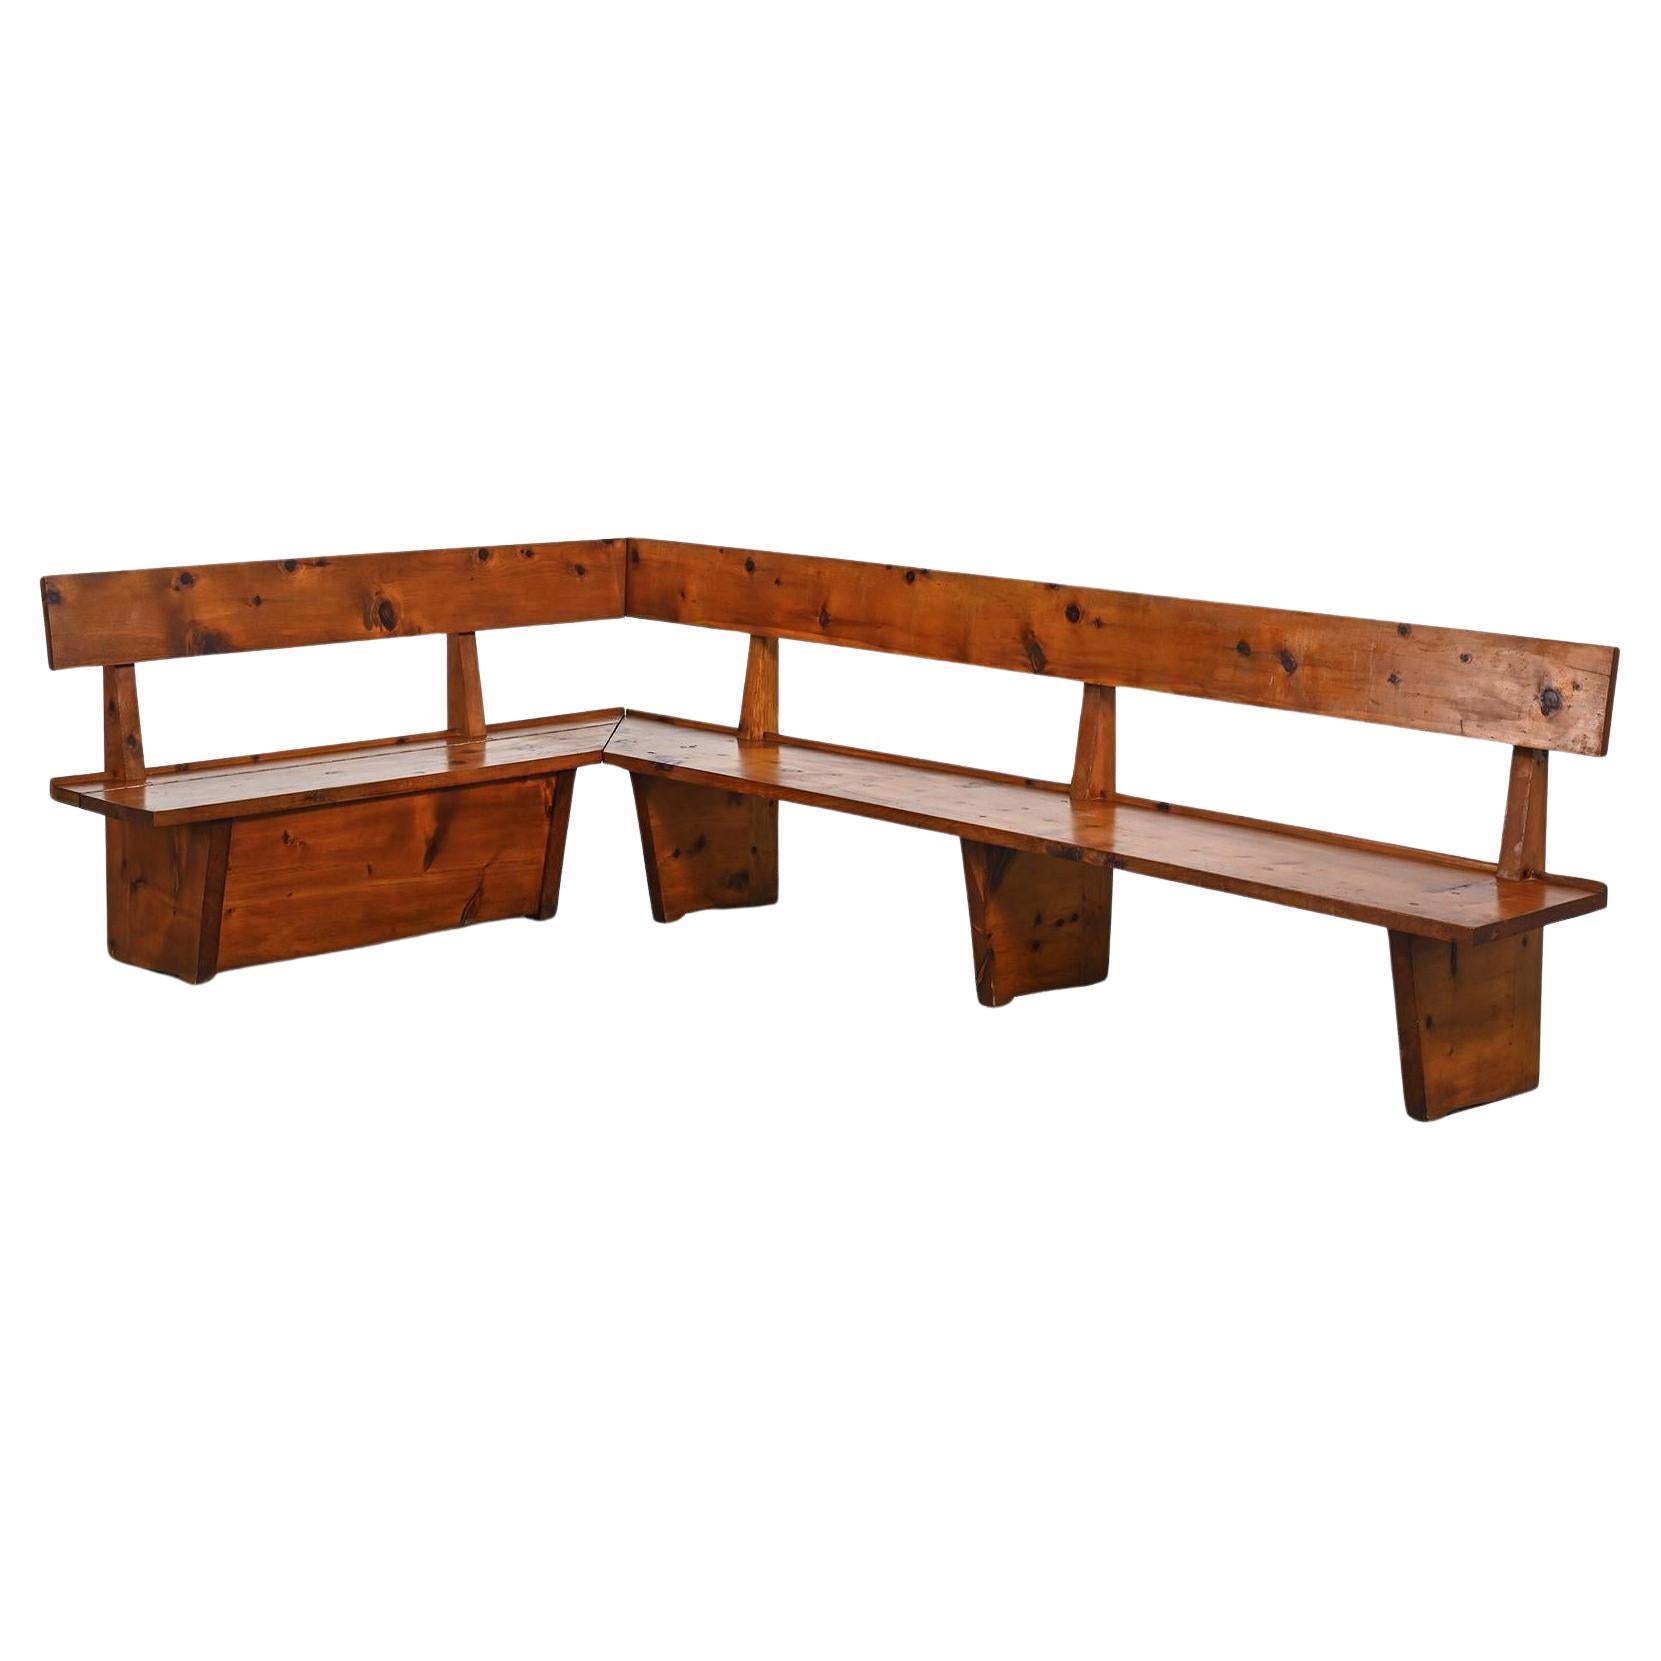 Large Vintage Bench in Solid Wood, France circa 1970